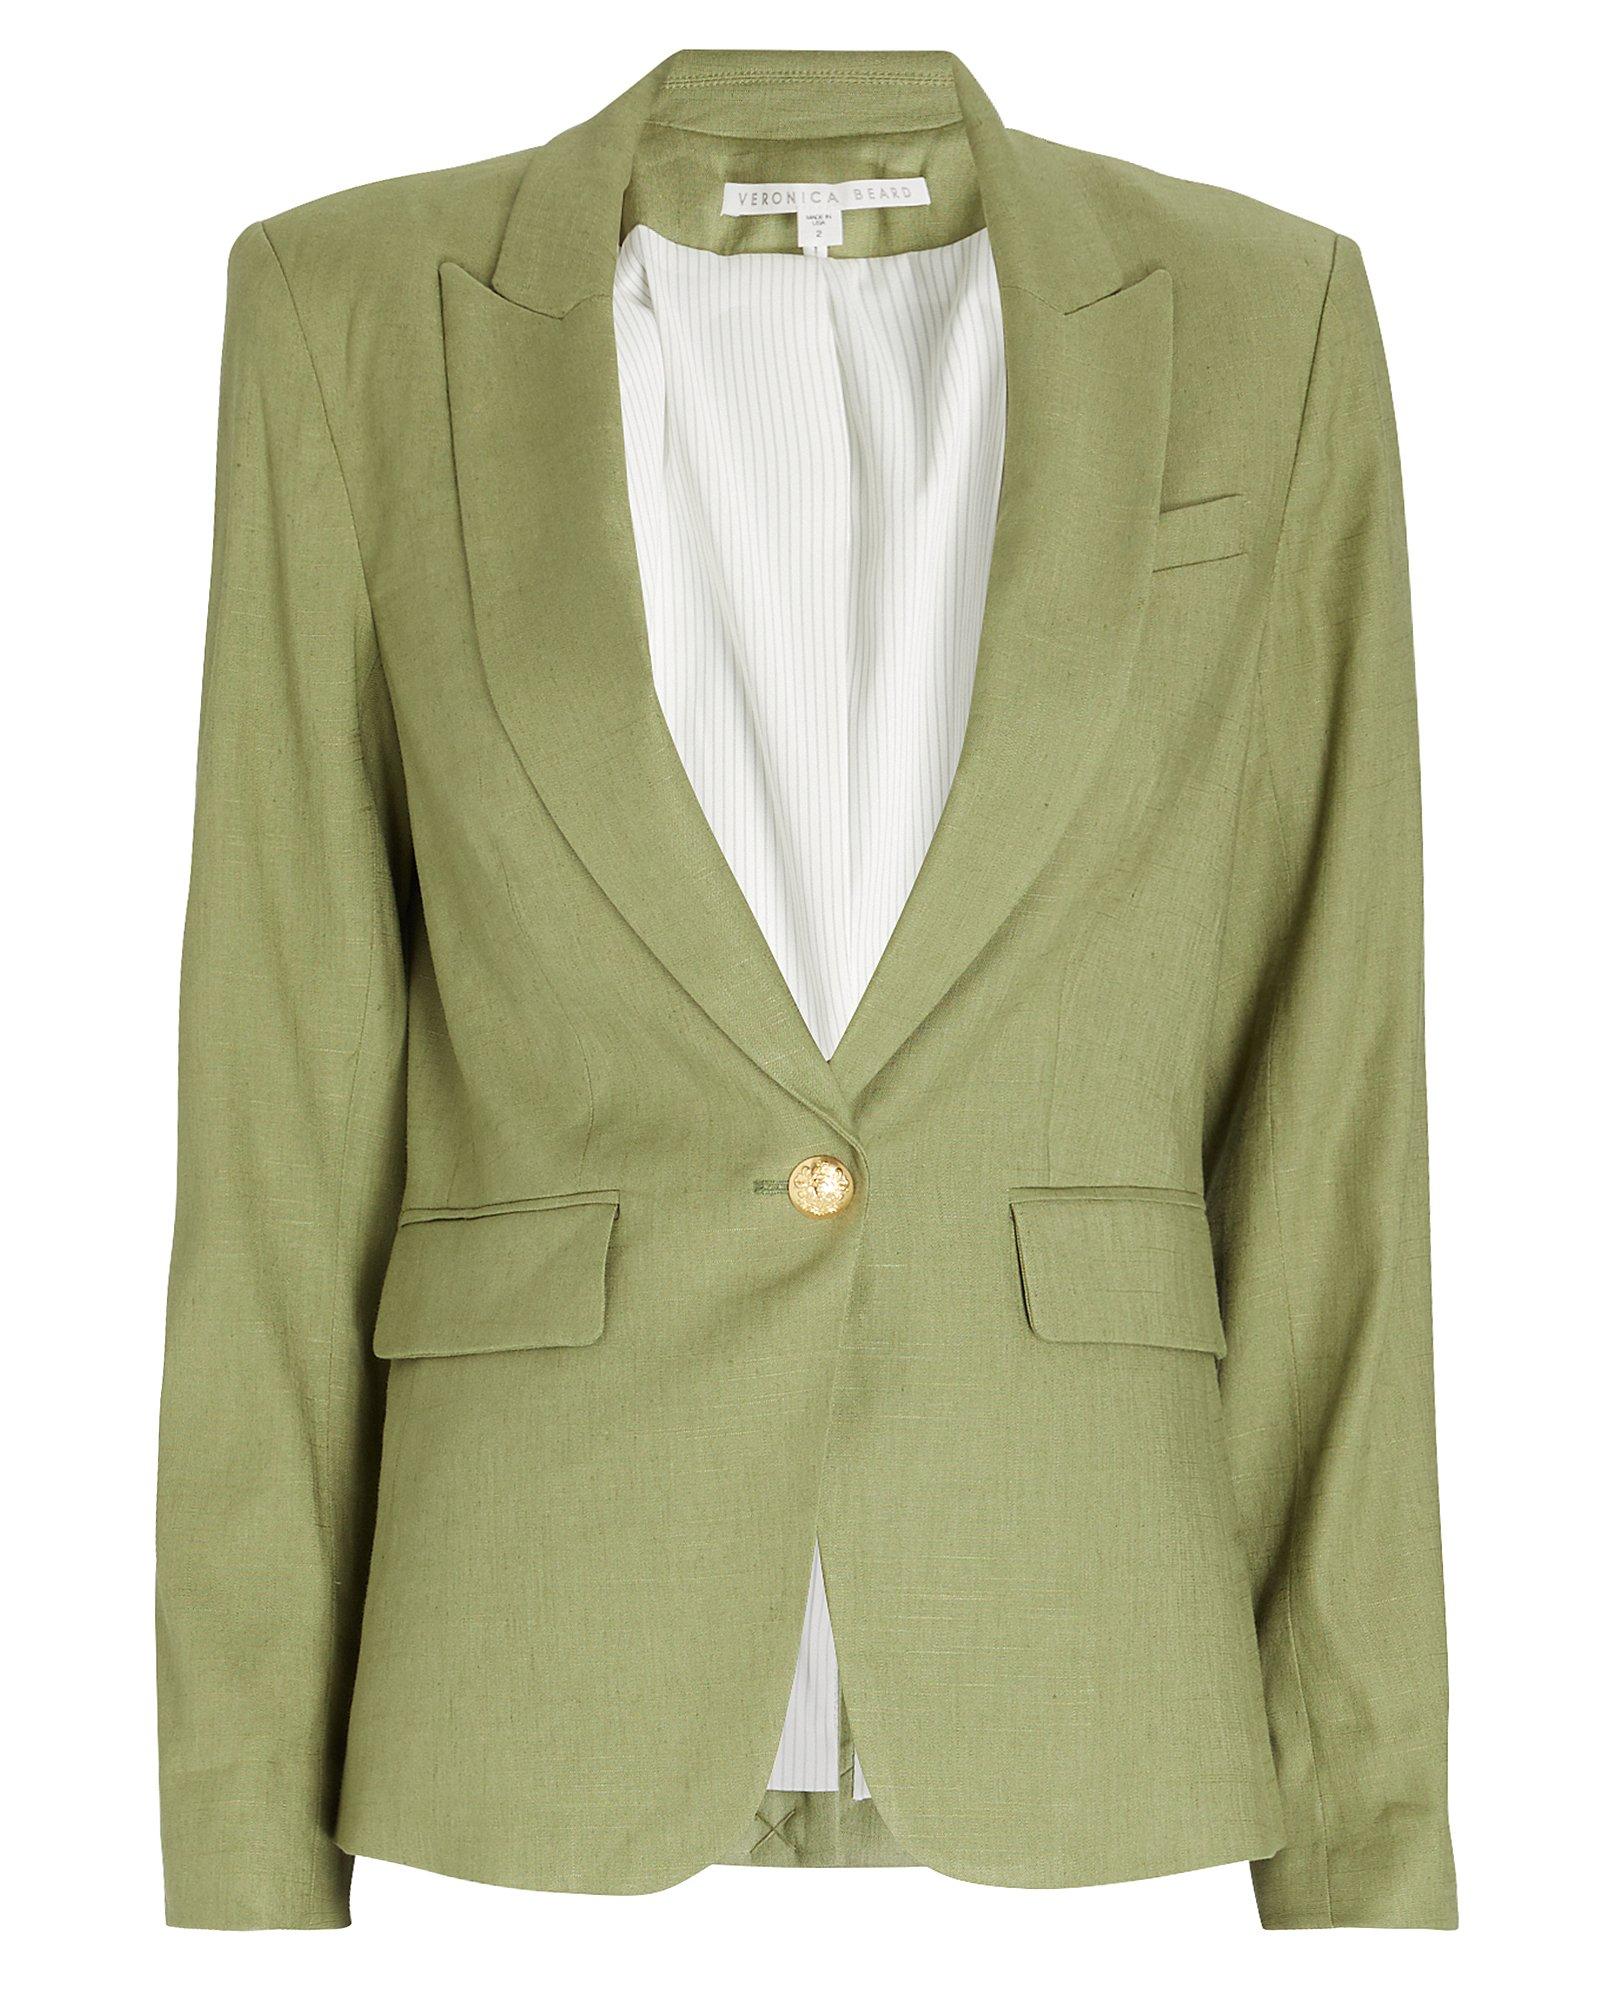 Veronica Beard Linen Dickey Blazer in Olive/Army (Green) - Save 57% - Lyst